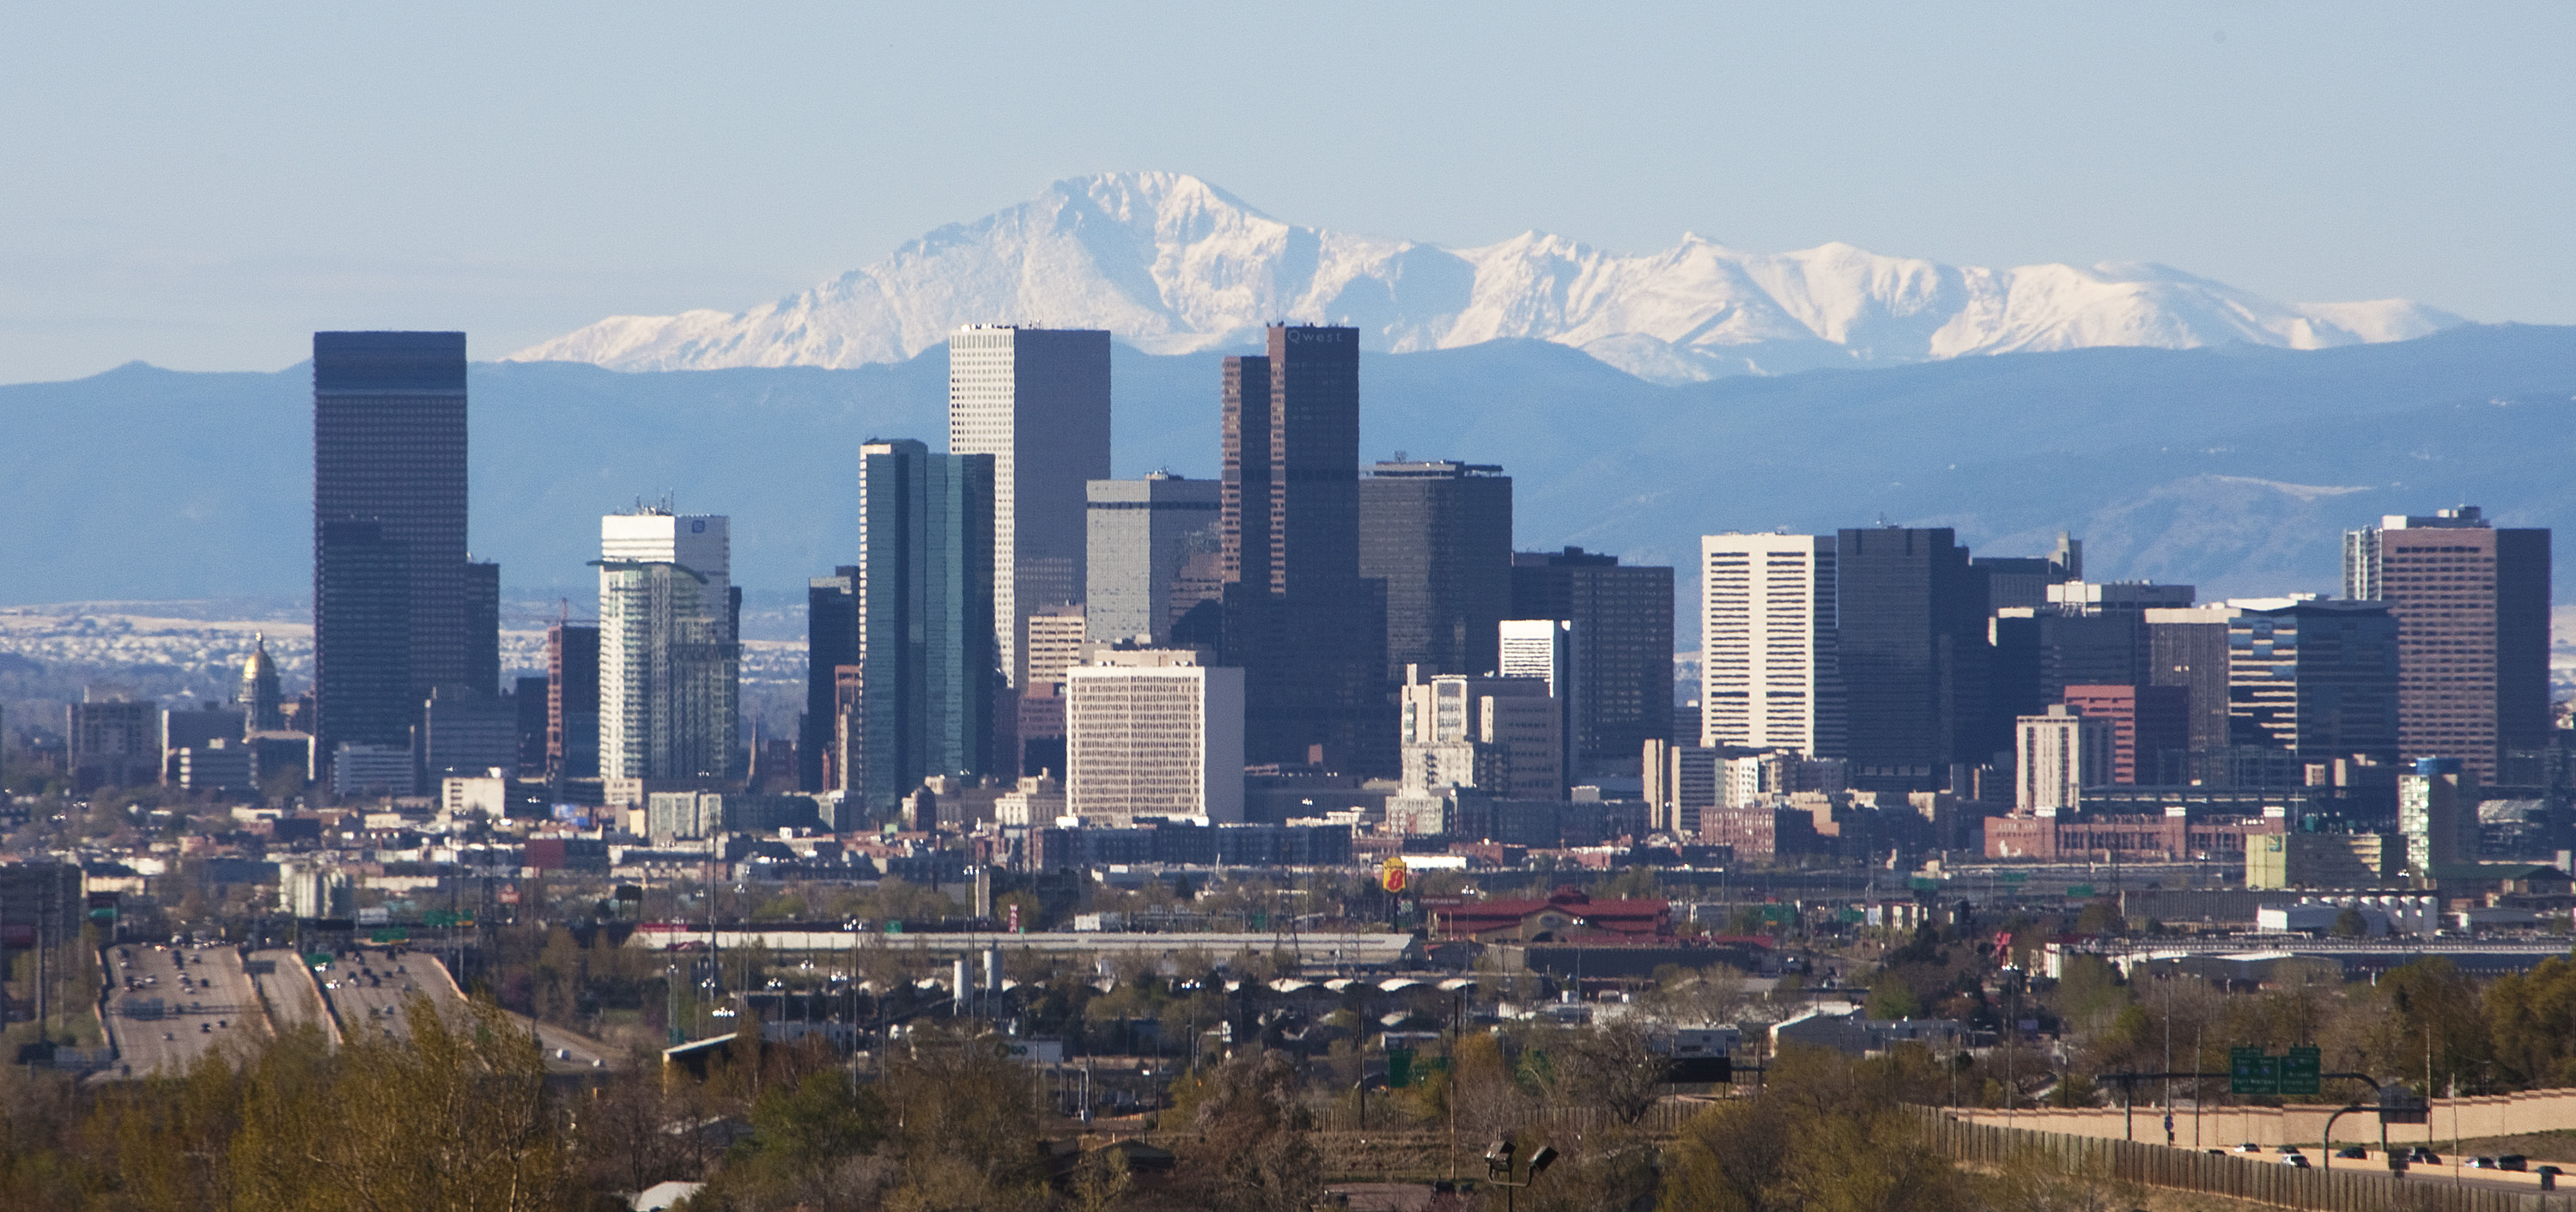 General Images of Skylines and Buildings in Denver 3000x1411